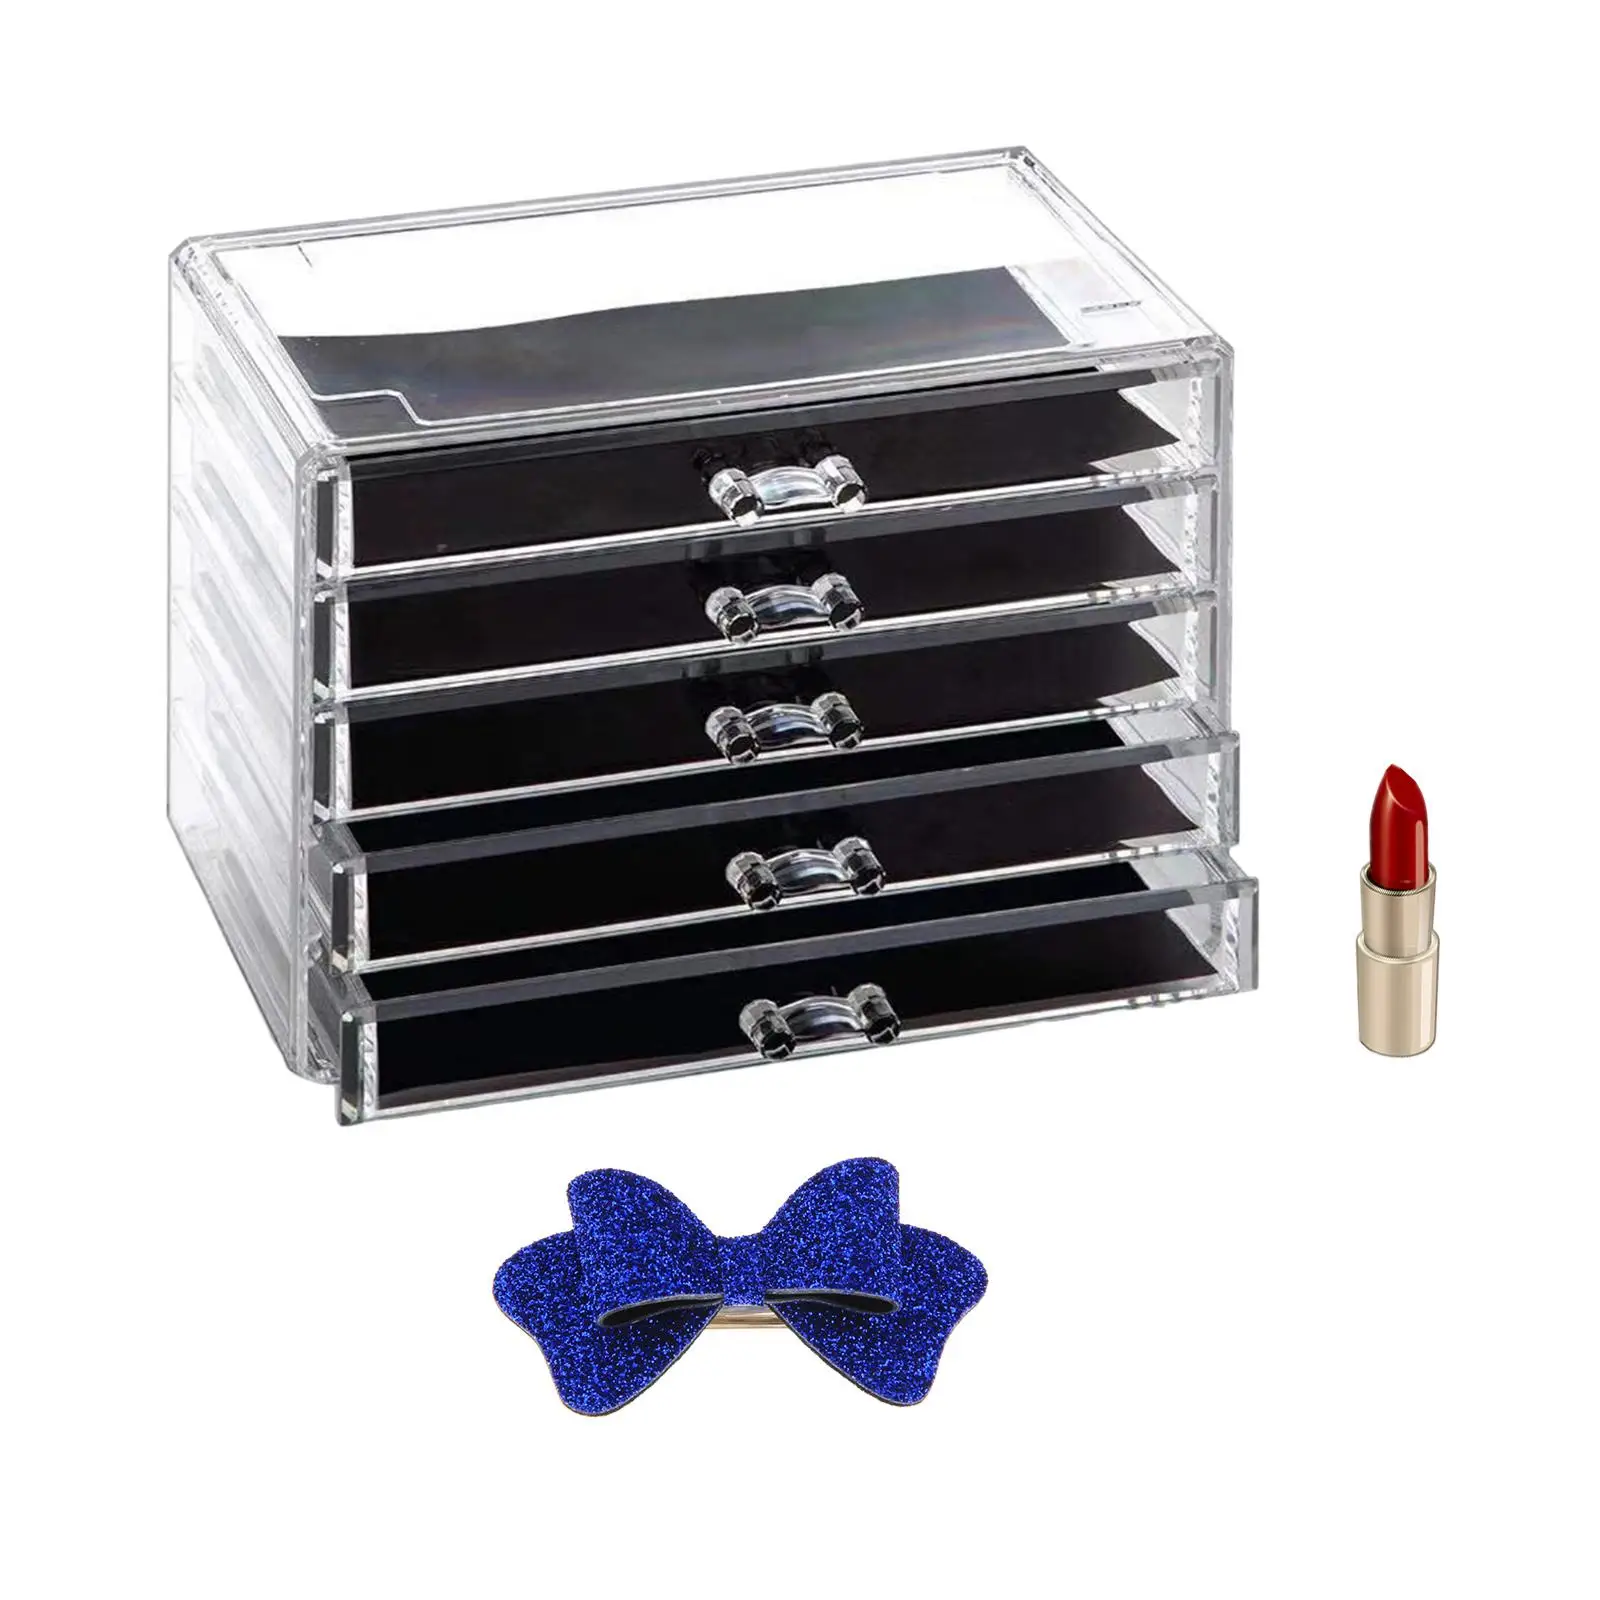  Organizer Skin Care Cosmetic Display Case Storage Box Make up Container with 5 Drawers for Bathroom